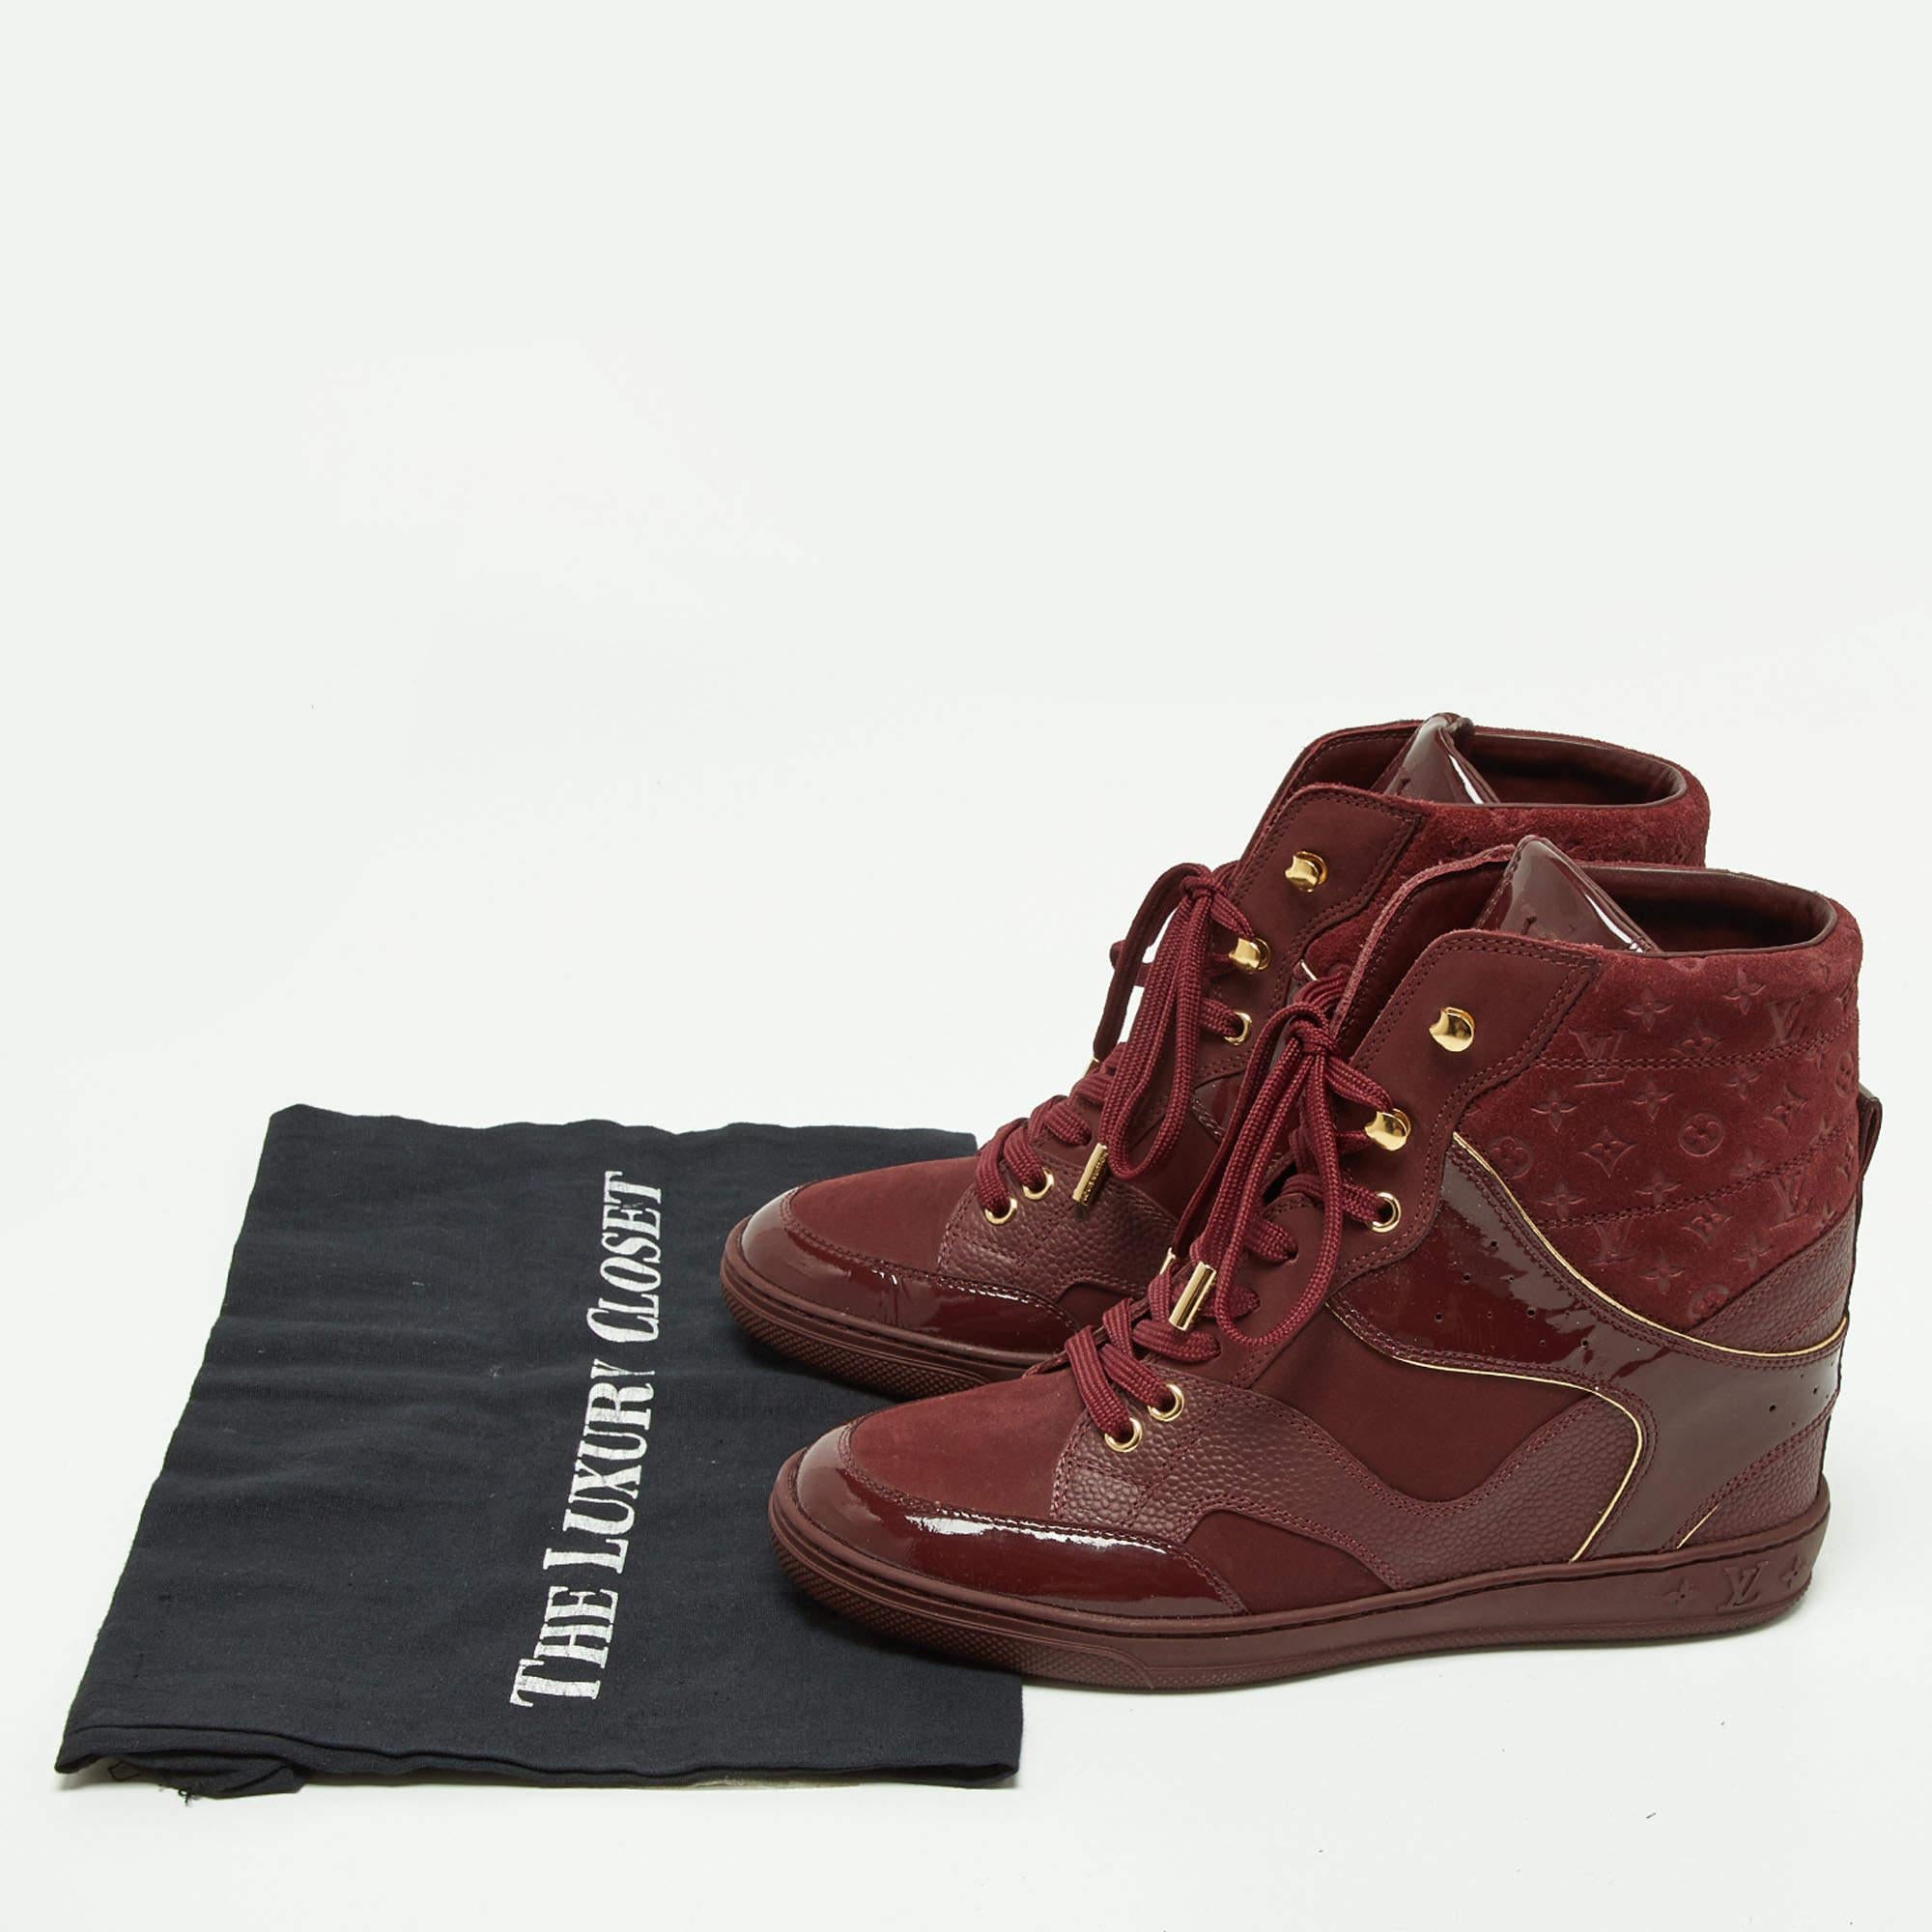 Louis Vuitton Burgundy Monogram Suede and Leather Millennium Wedge Sneakers  5